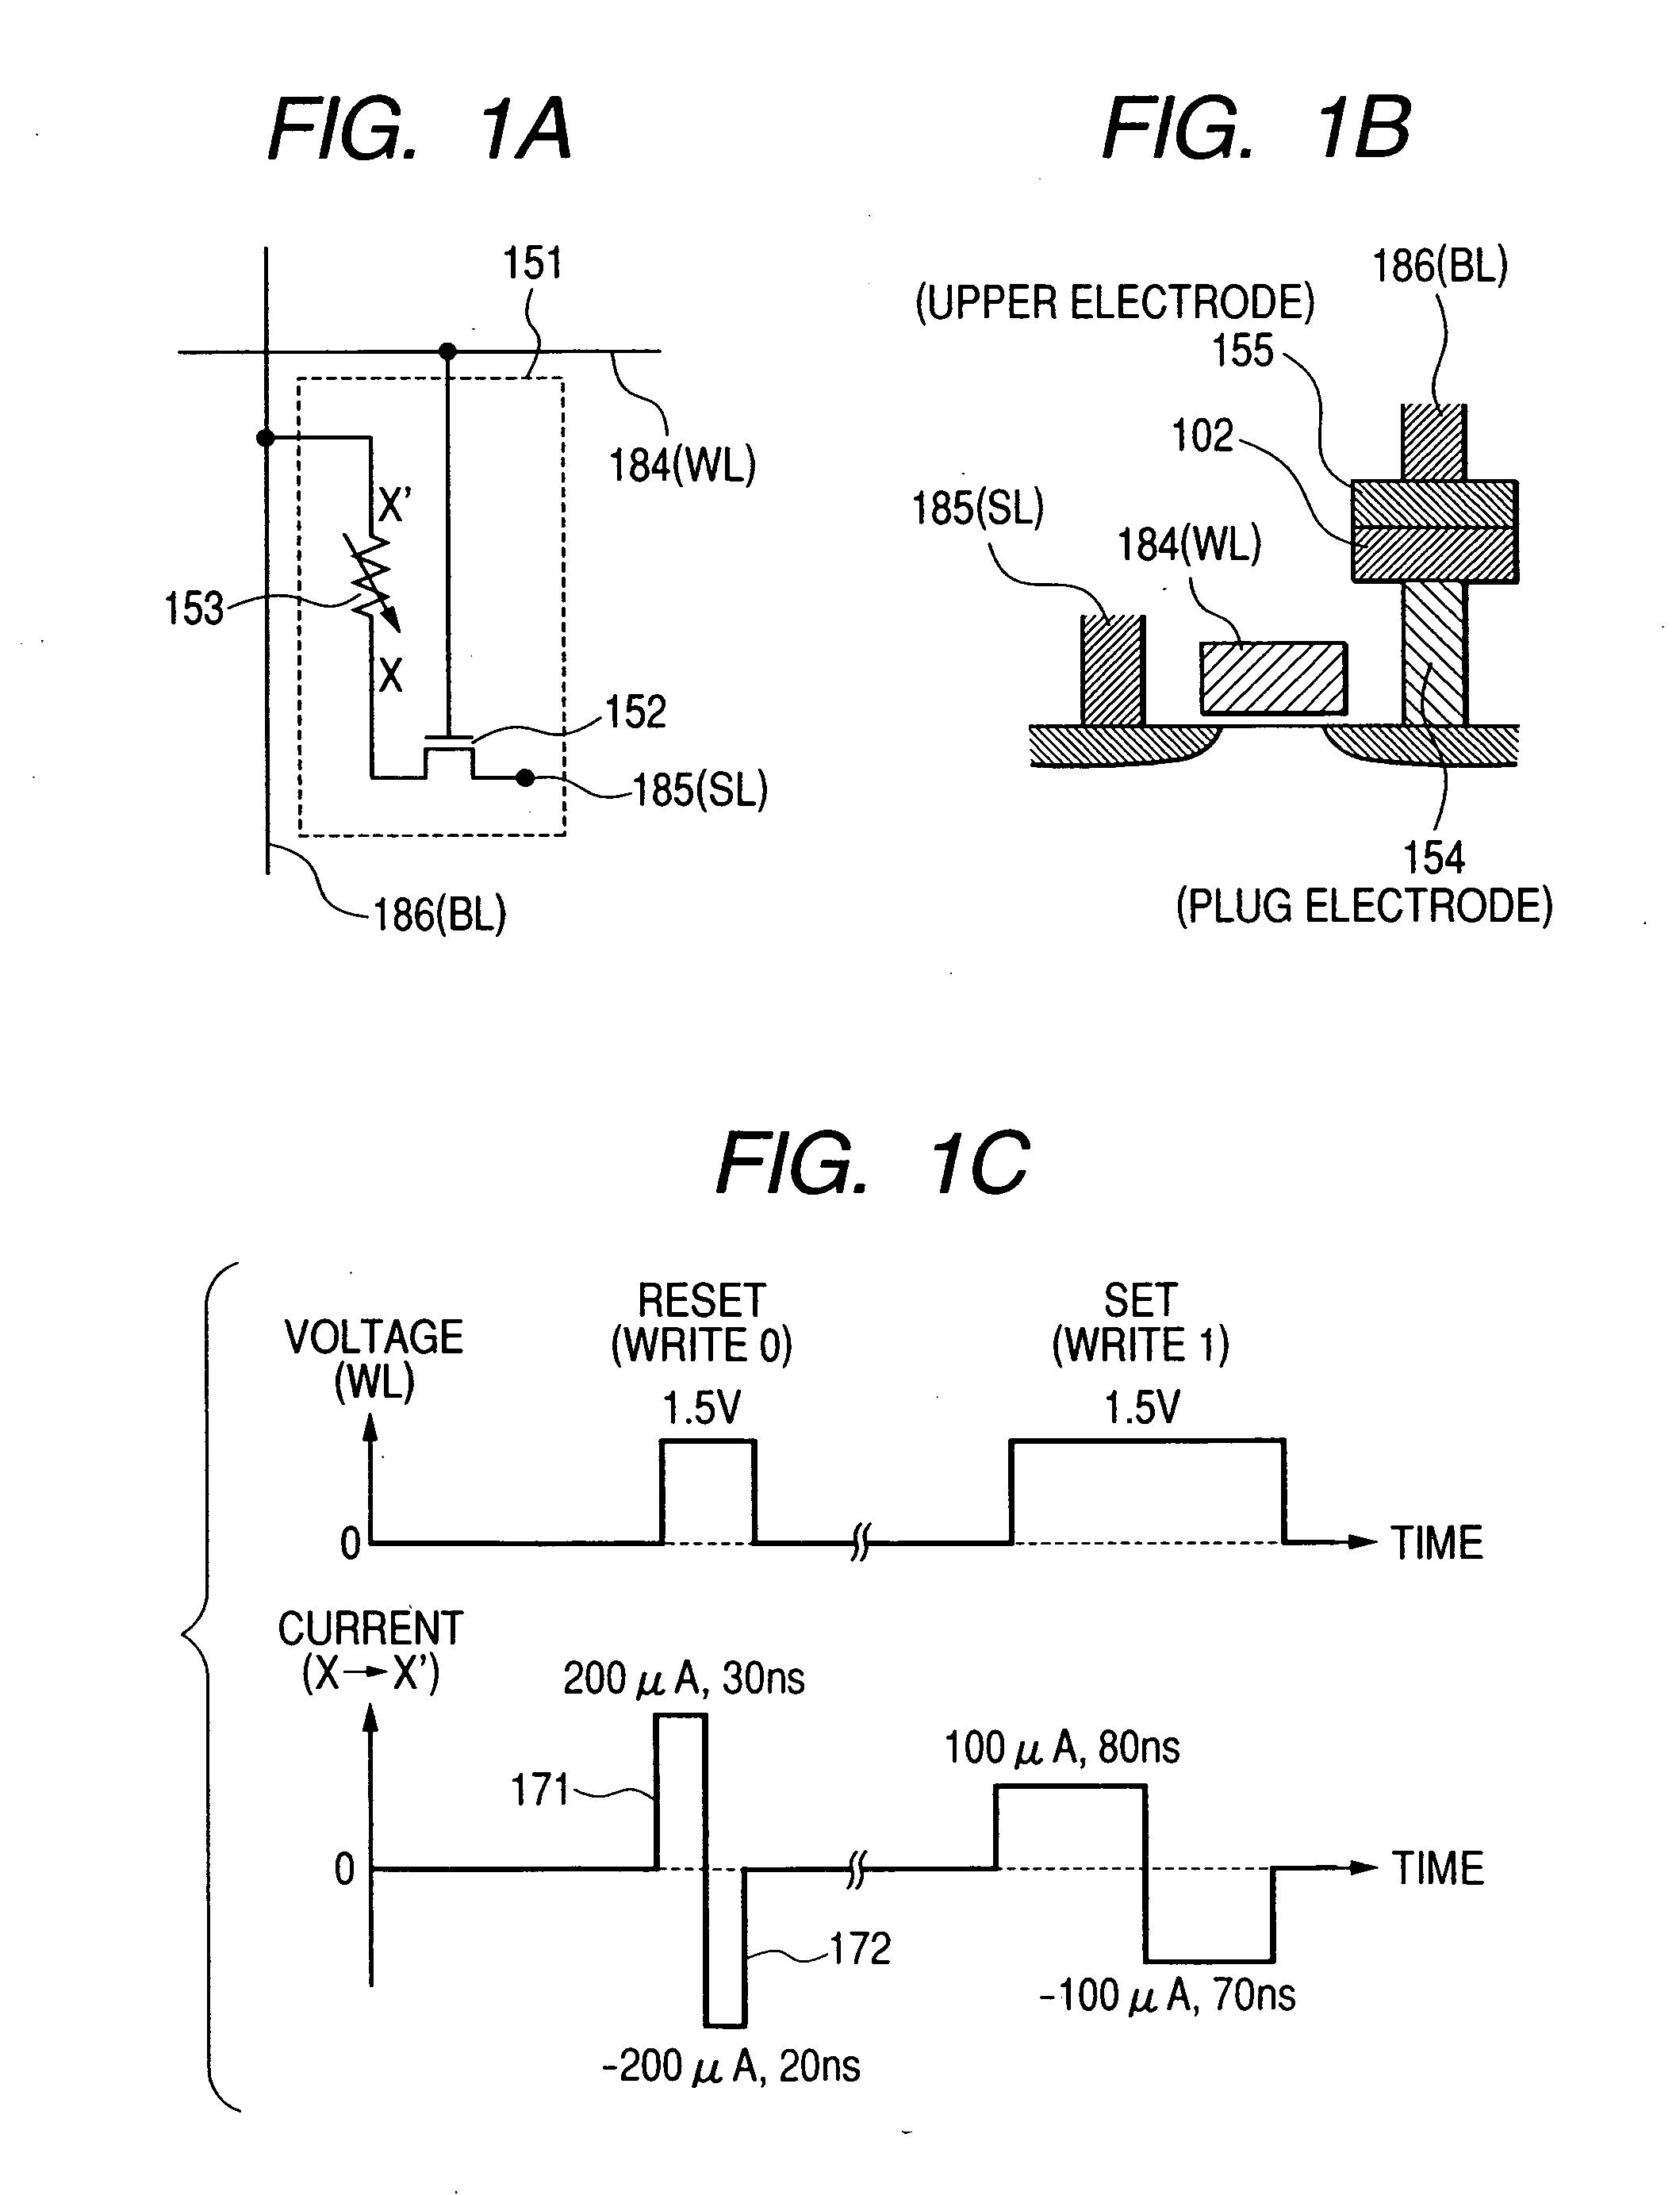 Semiconductor integrated device